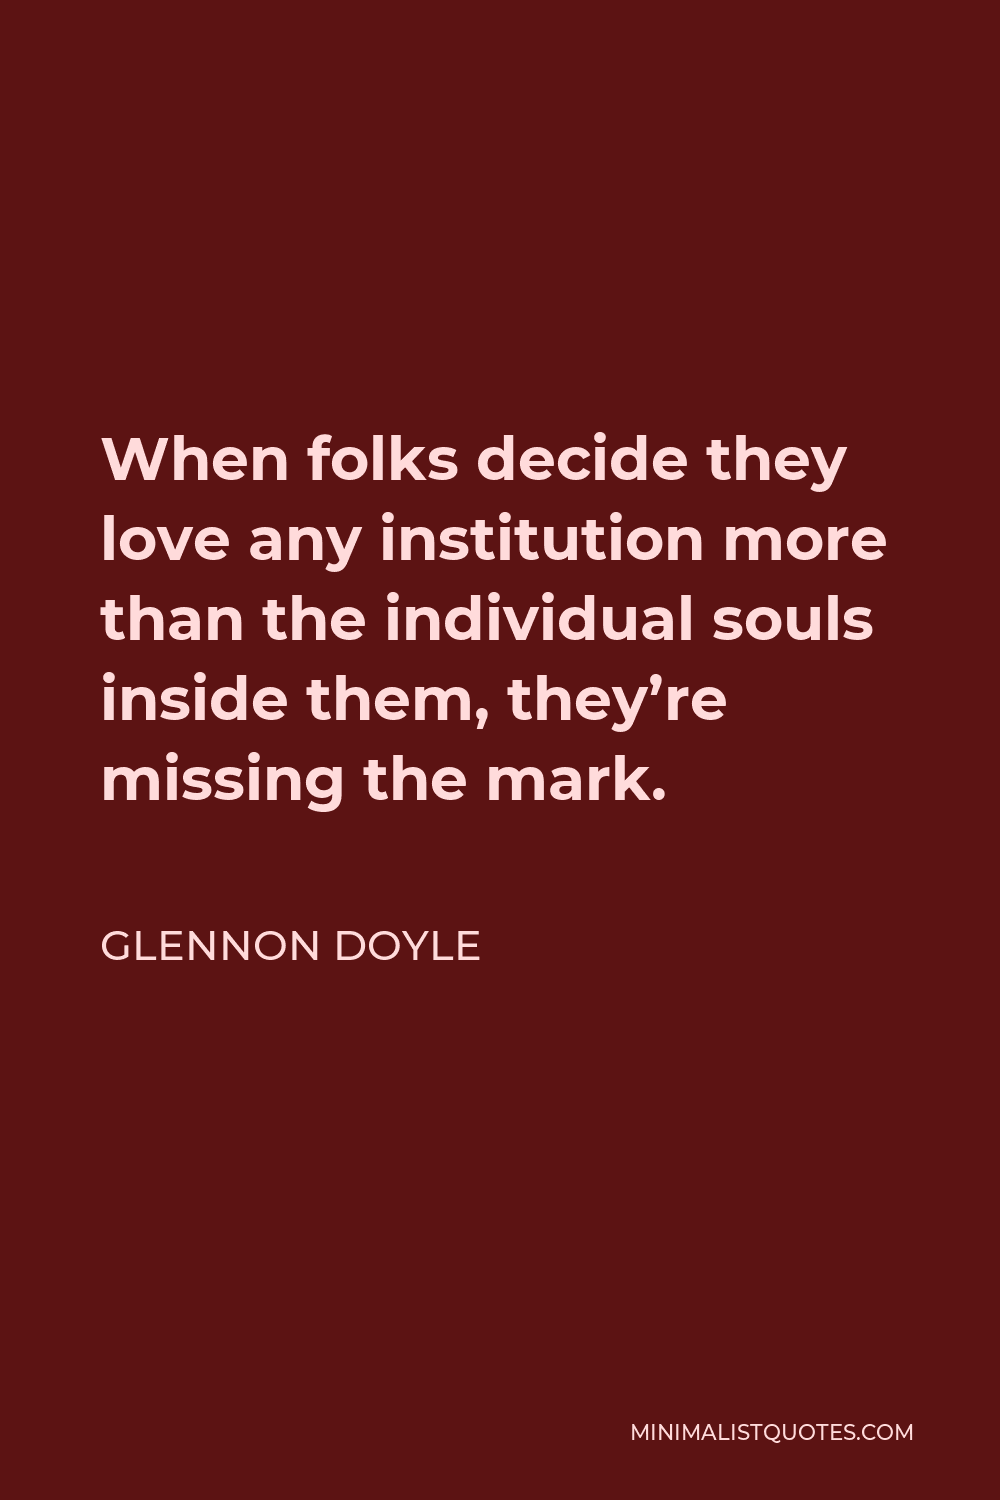 Glennon Doyle Quote - When folks decide they love any institution more than the individual souls inside them, they’re missing the mark.